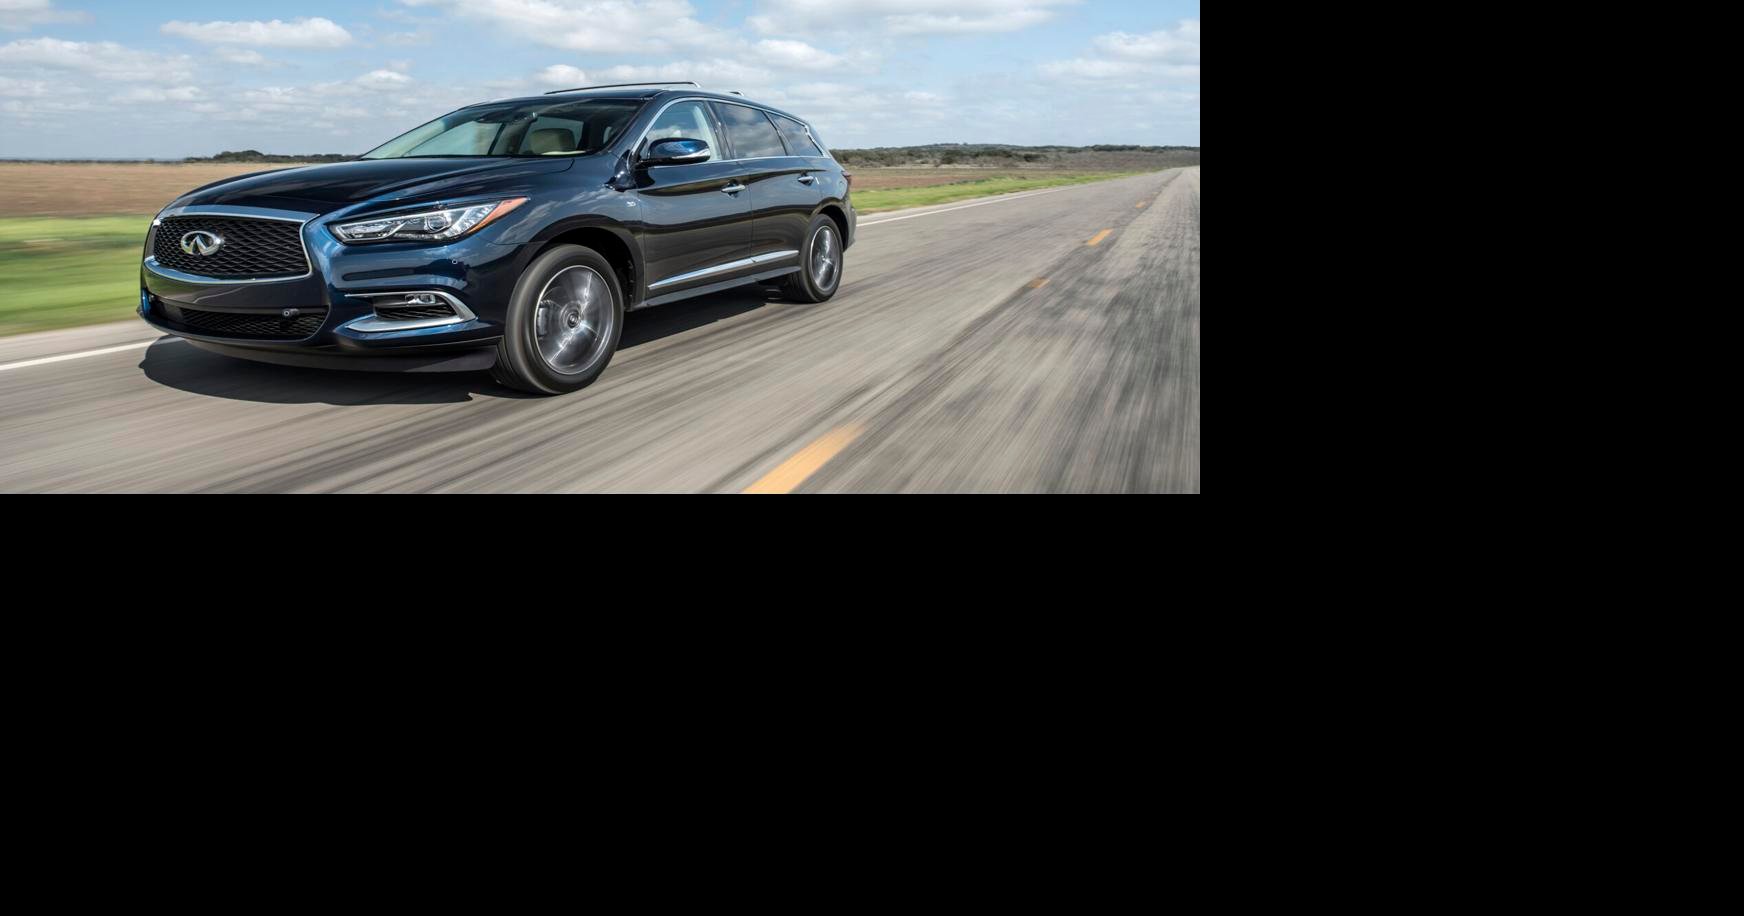 Infiniti QX60 earns top safety rating